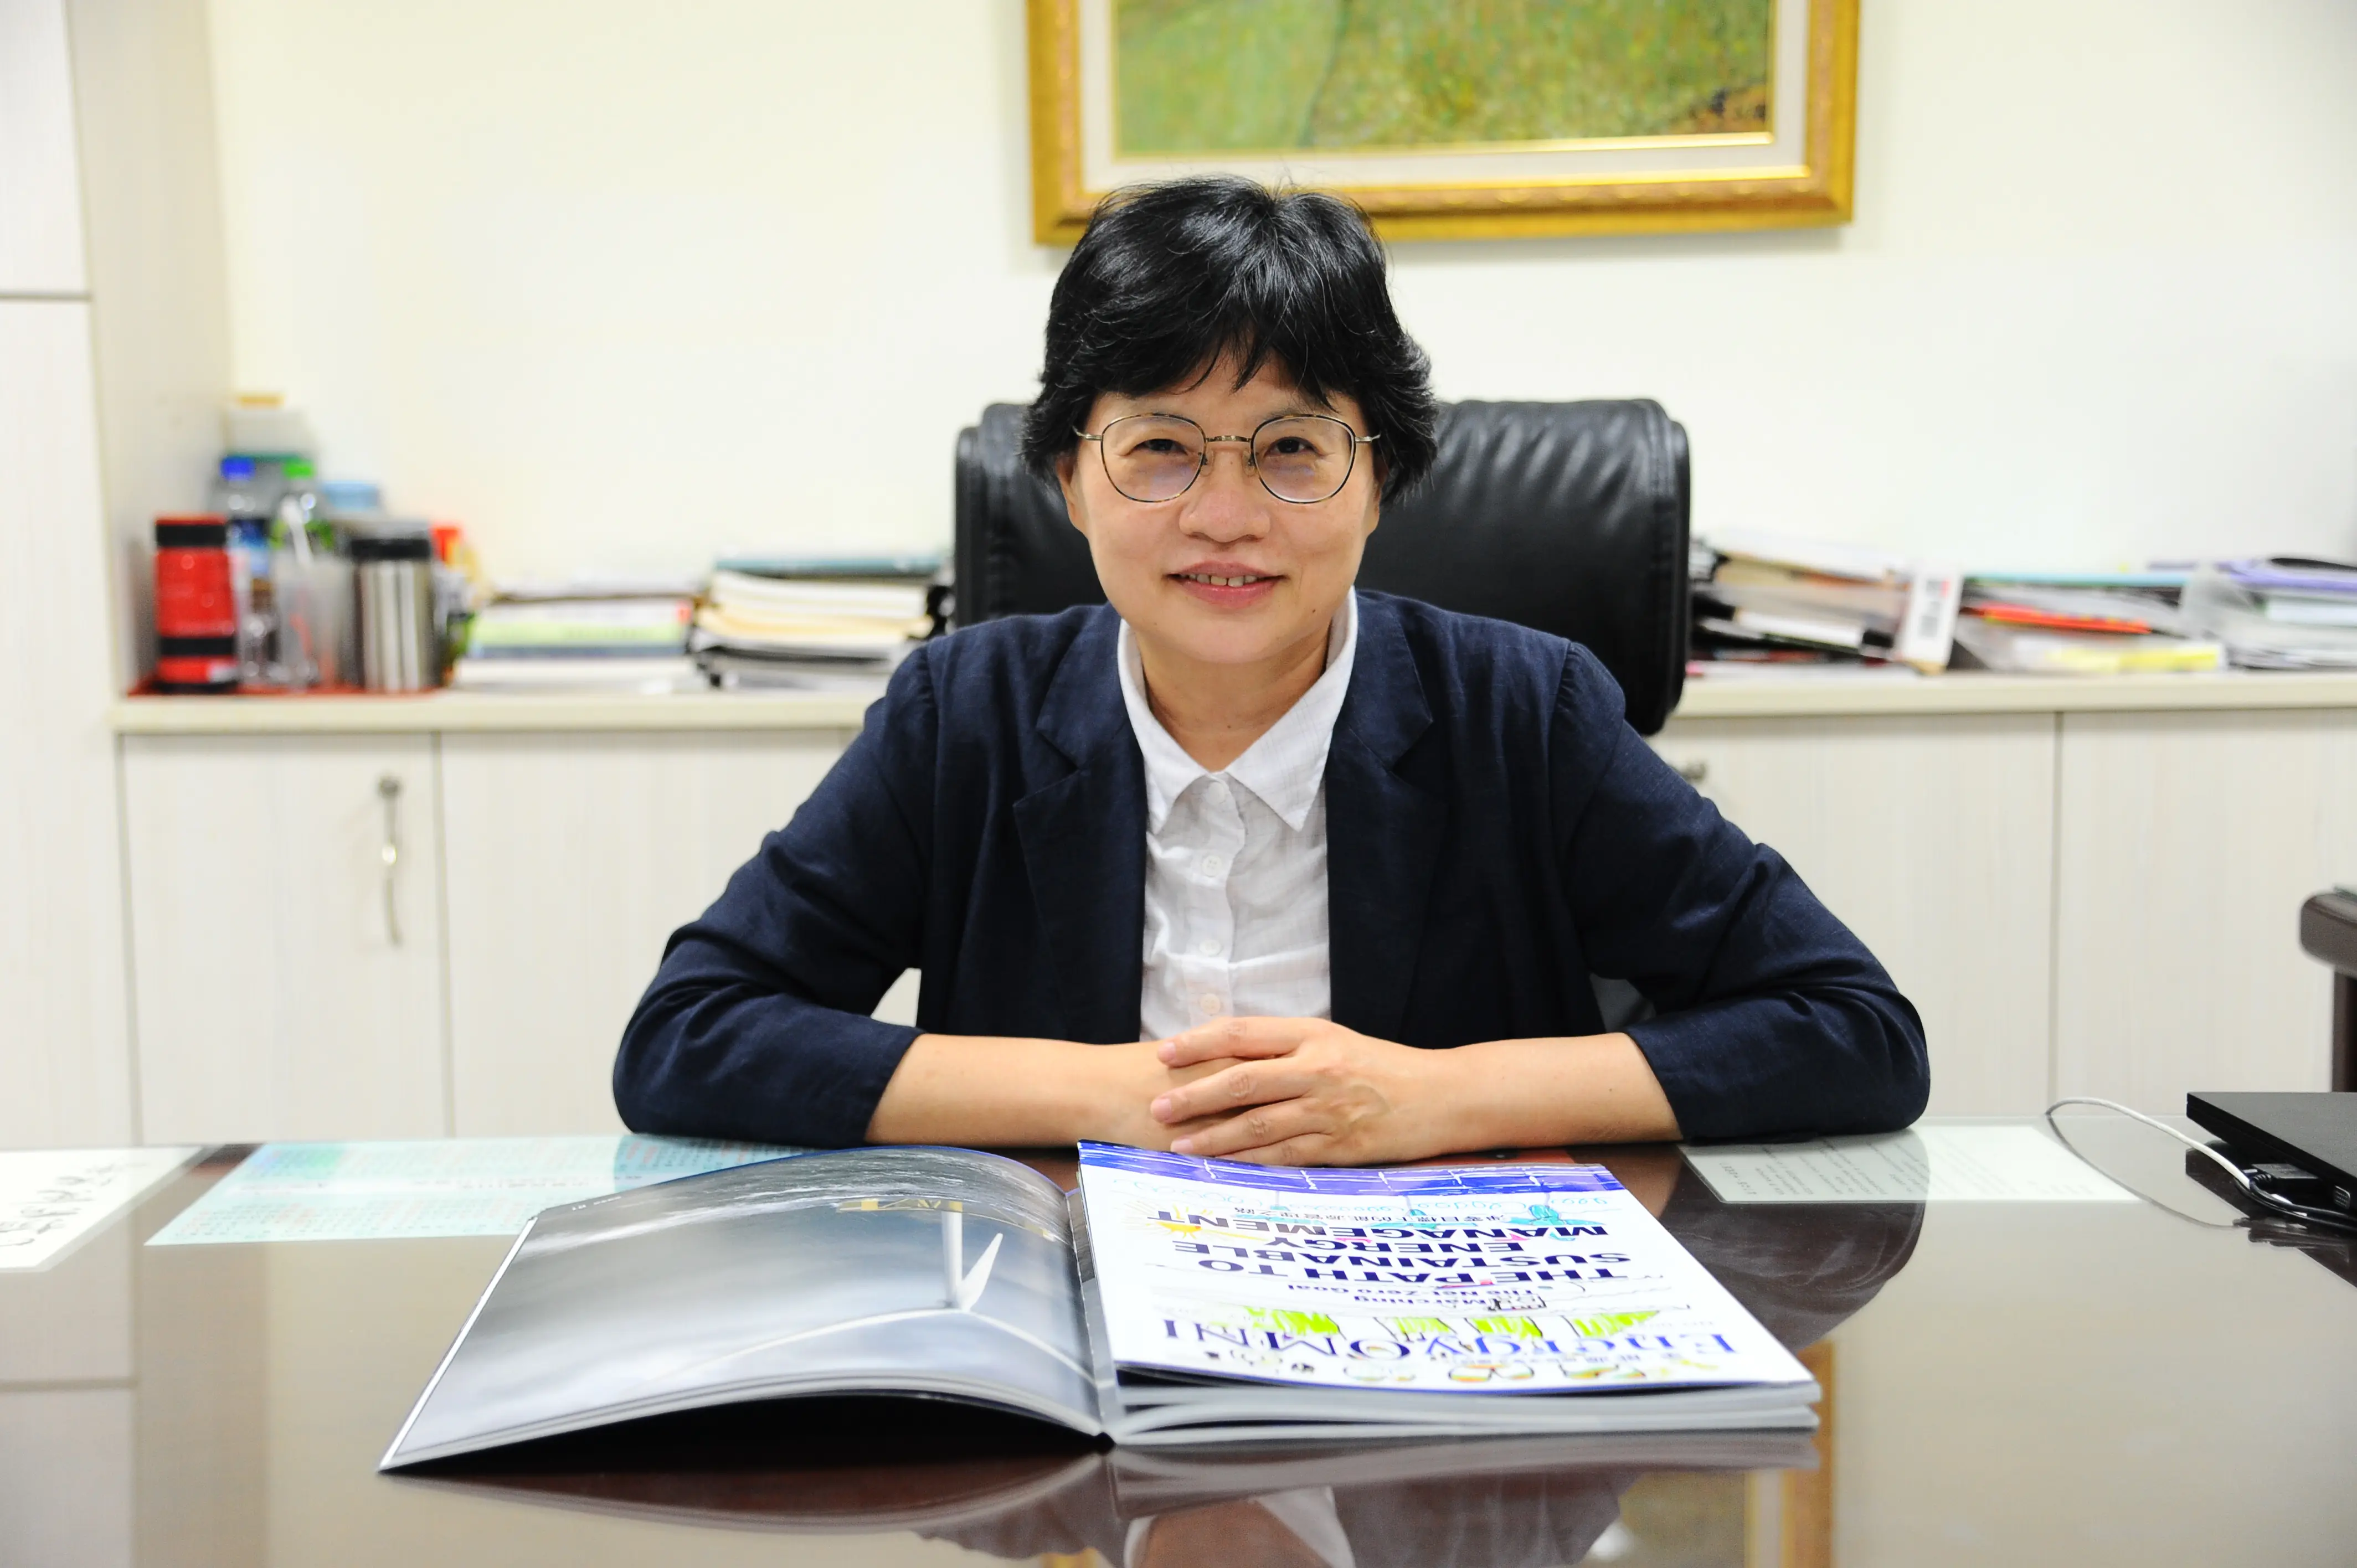 How Crucial is Women Involvement in the Battle Against Climate Change_Interview with Hua- Yu Teng, the Deputy Director of the Executive Yuan's Gender Equality Committee